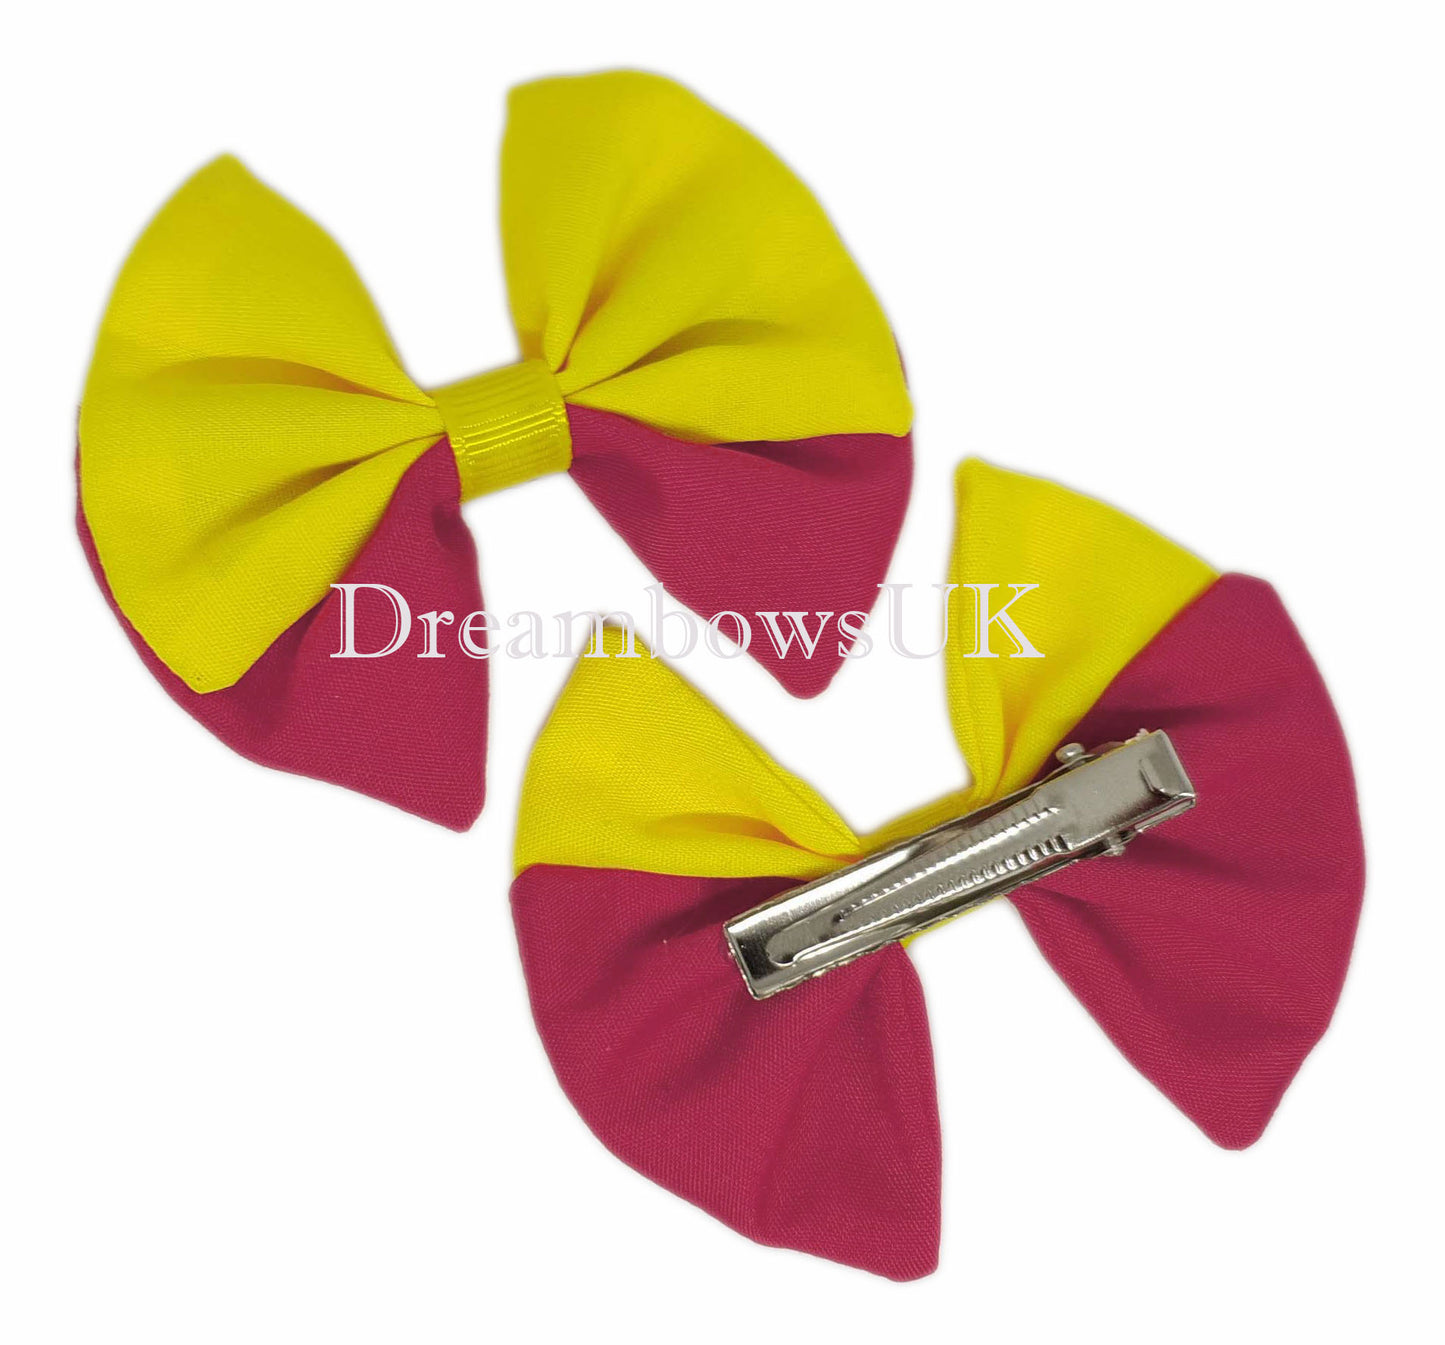 2x Cerise pink and yellow fabric hair bows